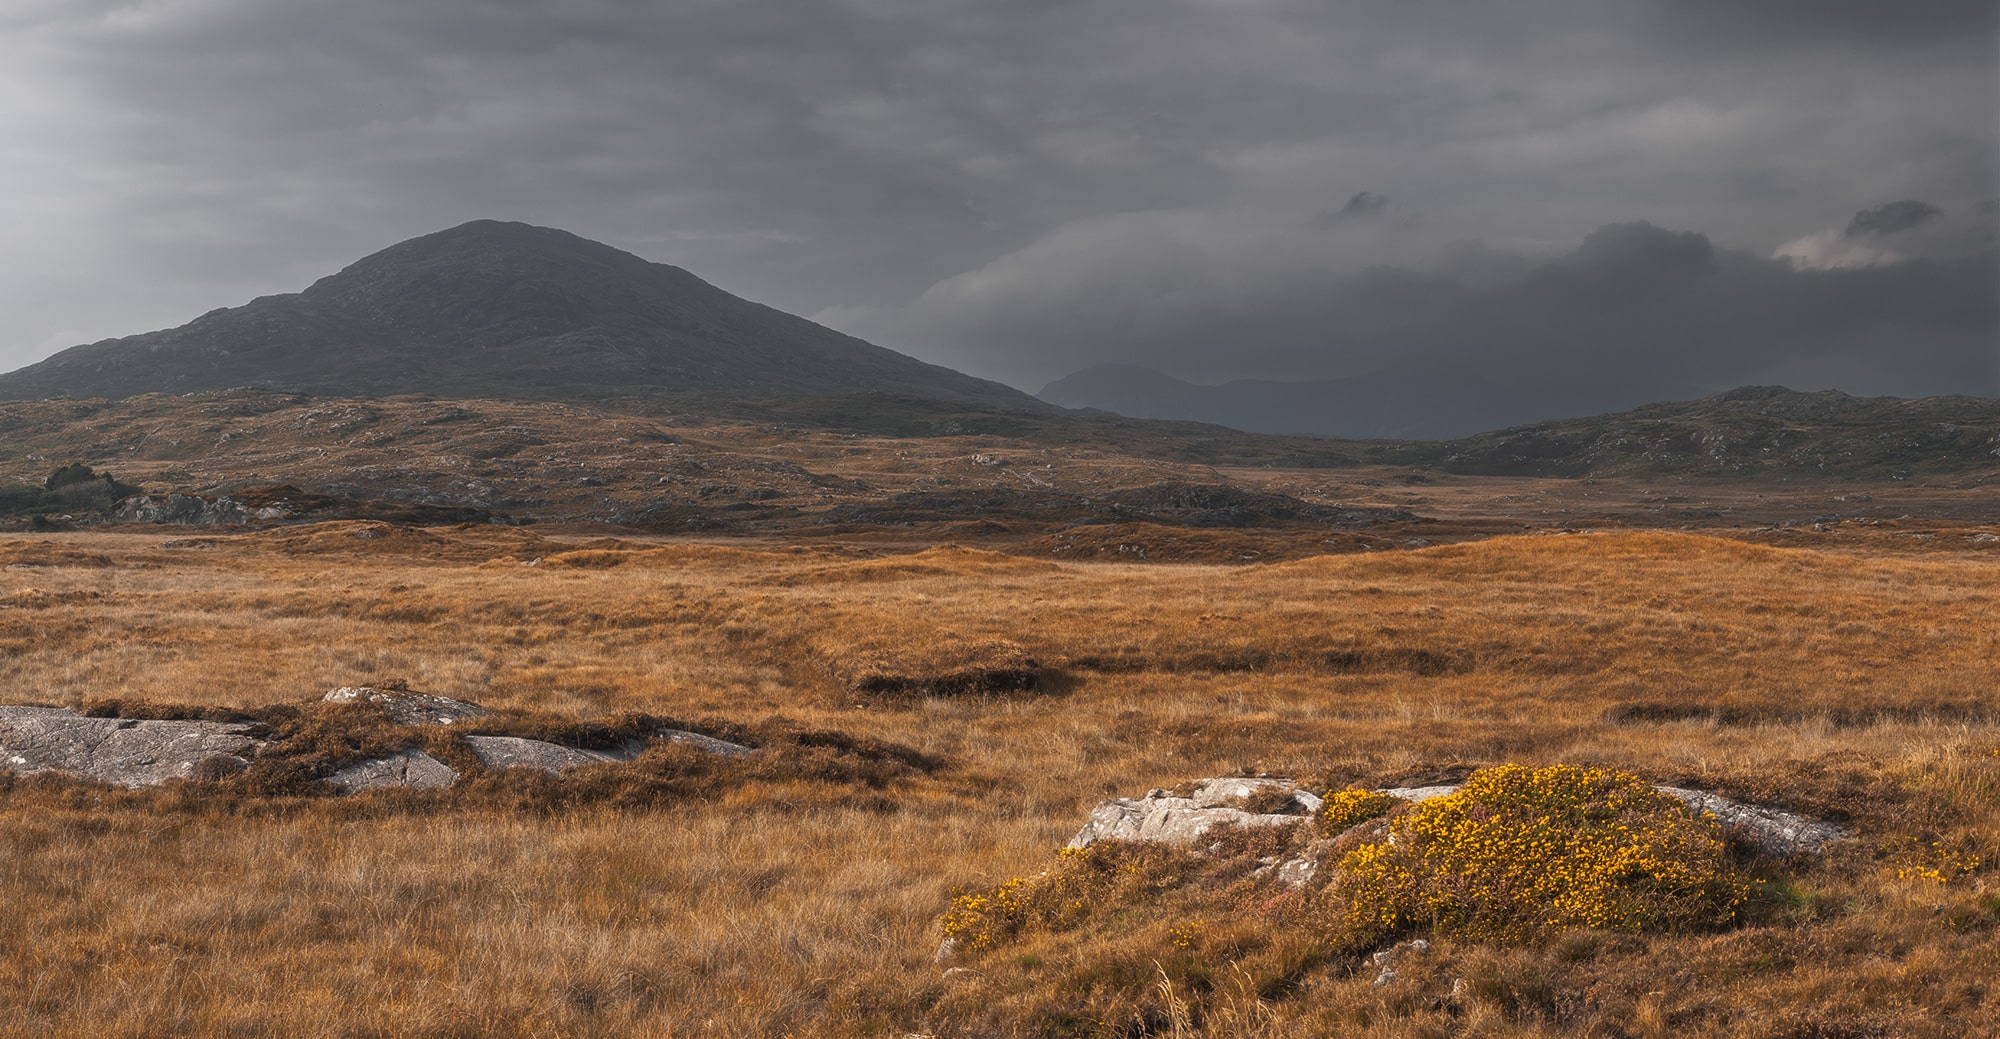 Embark on a visual journey through the untamed beauty of Connemara, near Galway in Ireland, with this epic landscape photography captured by Swiss photographer Jennifer Esseiva and her Nikon D810. Immerse yourself in the rugged wilderness and raw natural splendor of Connemara's rough landscape, where wild nature reigns supreme. This wide-angle photograph invites you to explore the vast expanses of Connemara, where every corner reveals a breathtaking vista waiting to be discovered. Join Jennifer Esseiva on this captivating exploration of Ireland's wild heartland, where the beauty of the land knows no bounds.